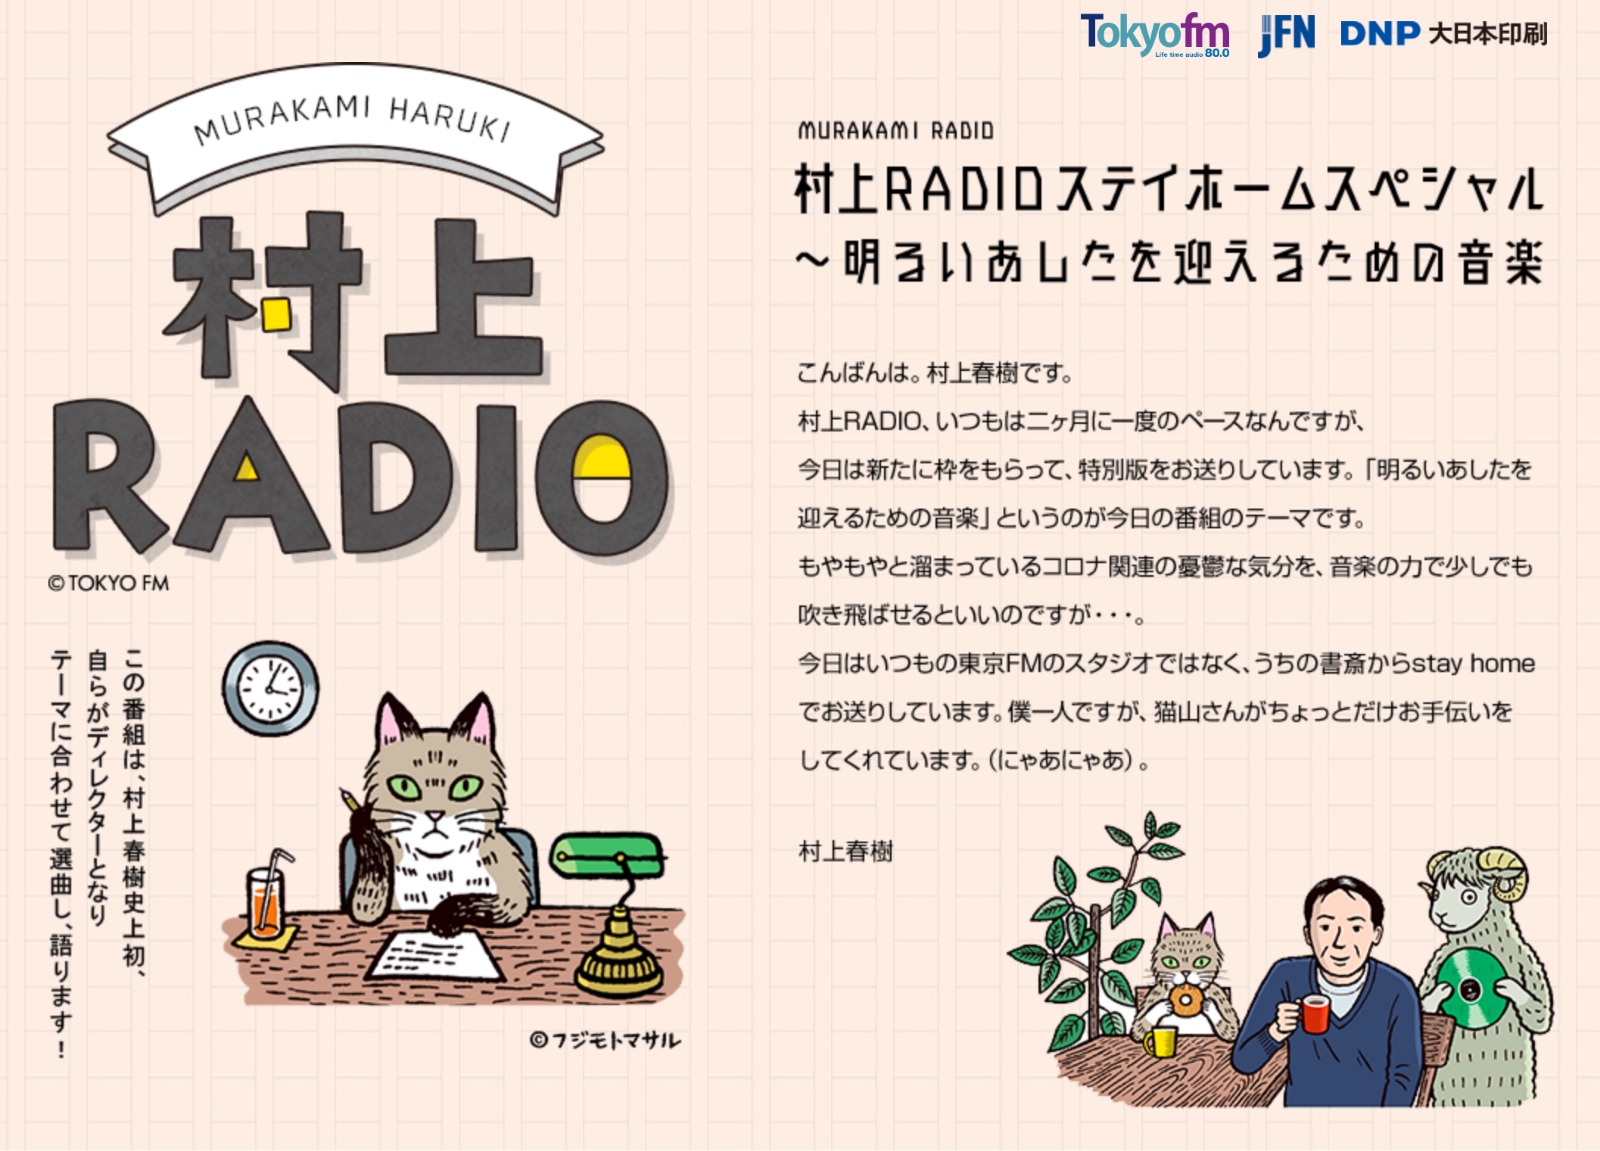 'I'm hoping that the power of music can do a little to blow away some of the corona-related blues that have been piling up,' Murakami wrote on a web page promoting the special. | COURTESY OF TFM.CO.JP